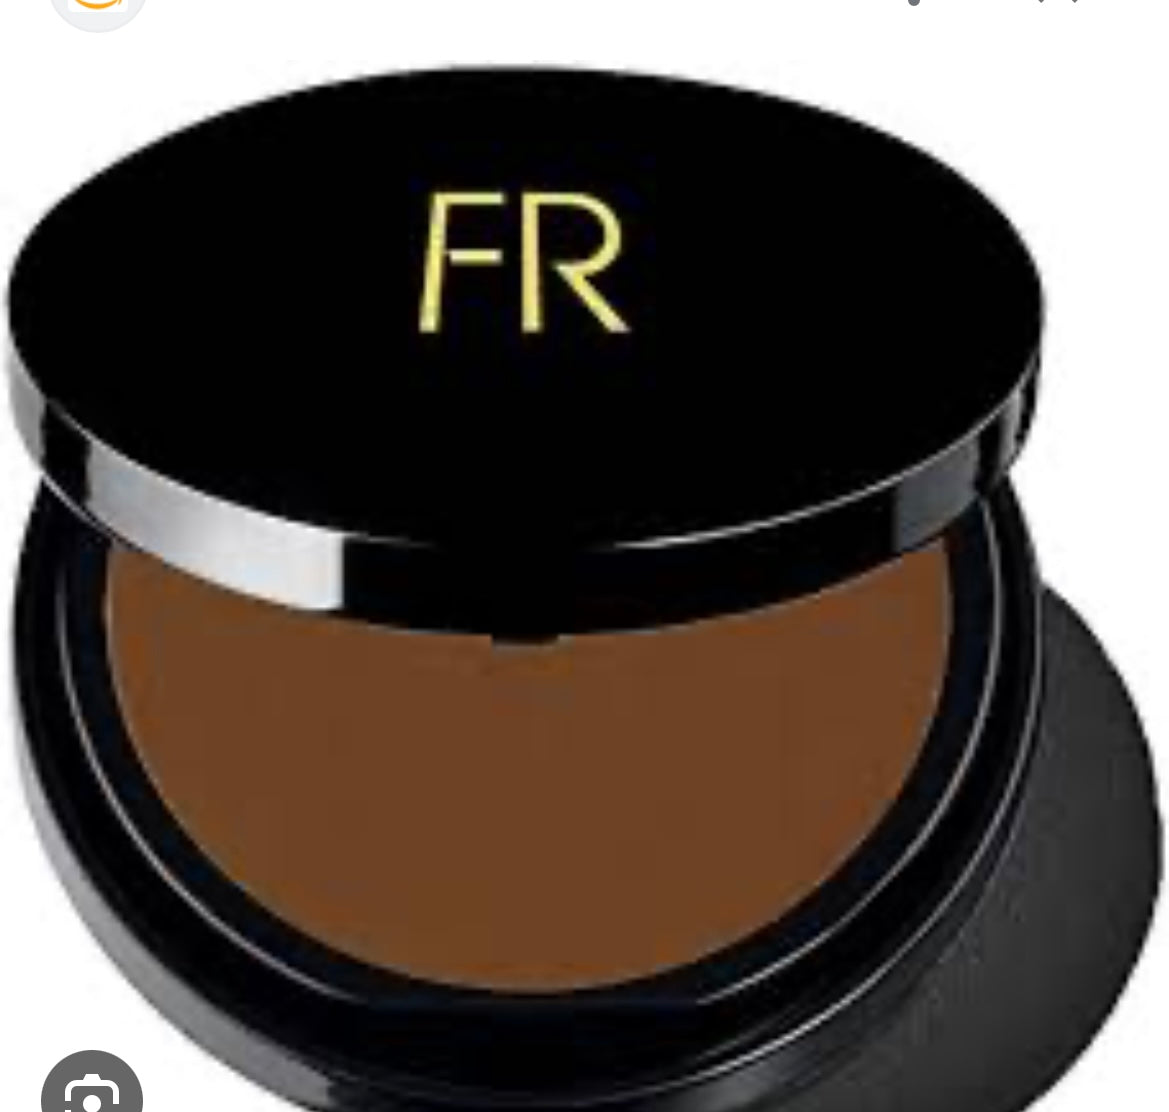 Best Creme to Powder Foundation For Women of Color or Deeper Skin Tones - Shade - SEPIA